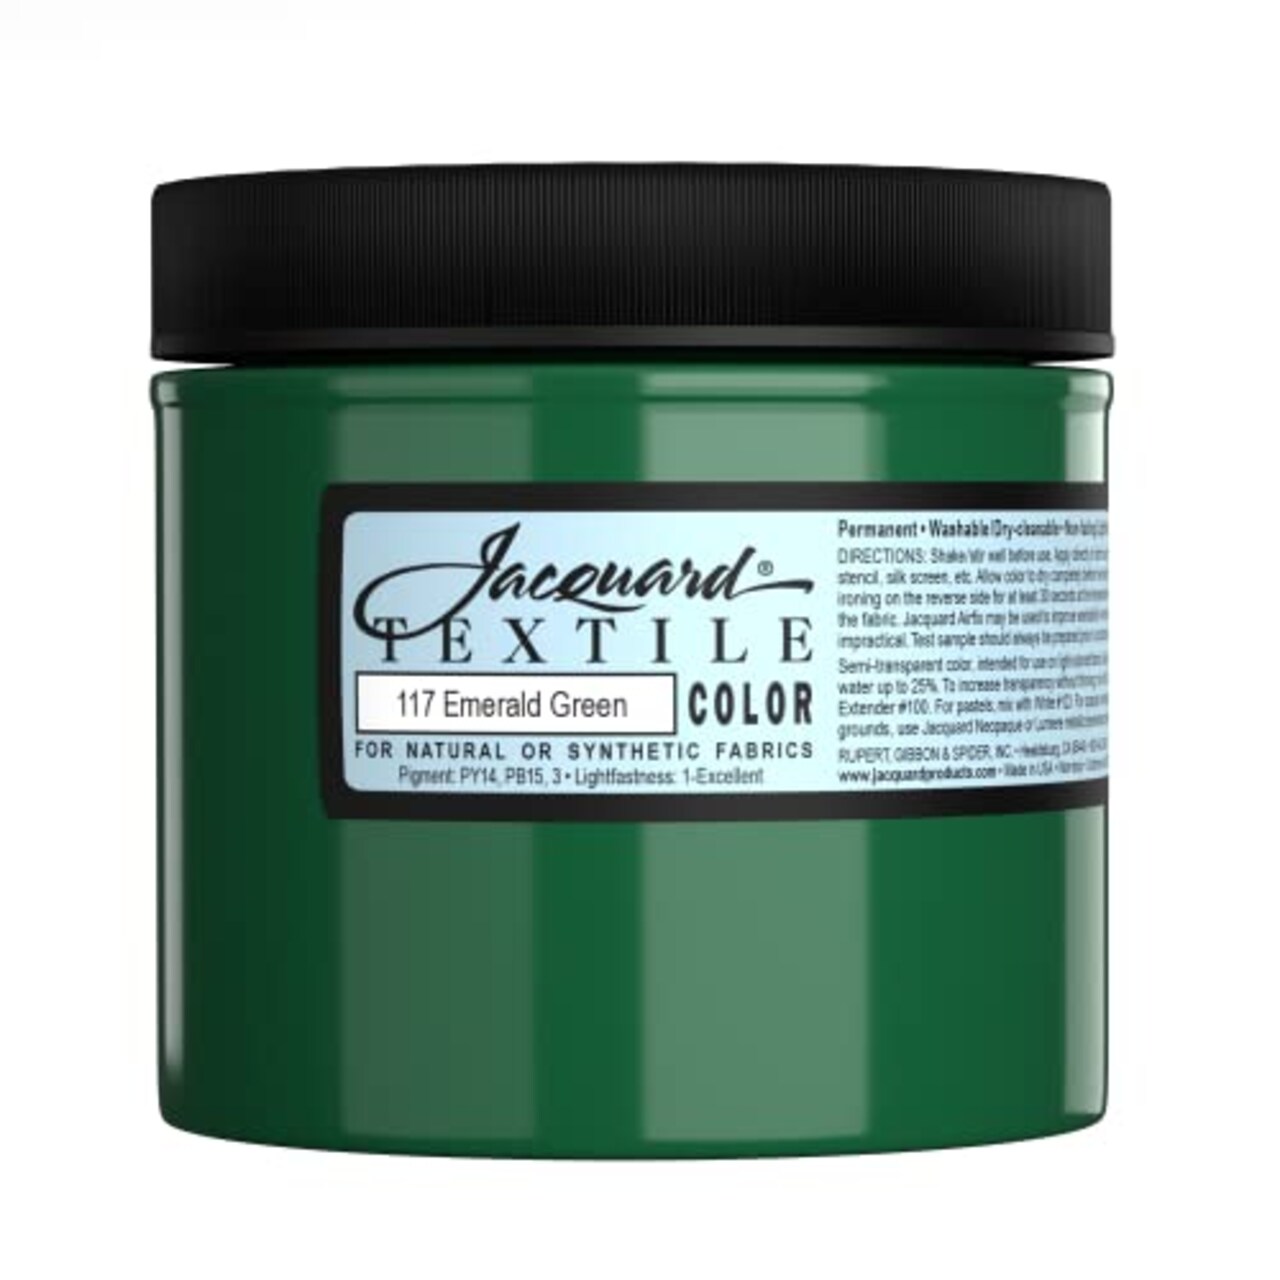 Jacquard Fabric Paint for Clothes - 8 Oz Textile Color - Emerald Green -  Leaves Fabric Soft - Permanent and Colorfast - Professional Quality Paints  Made in USA - Holds up Exceptionally Well to Washing